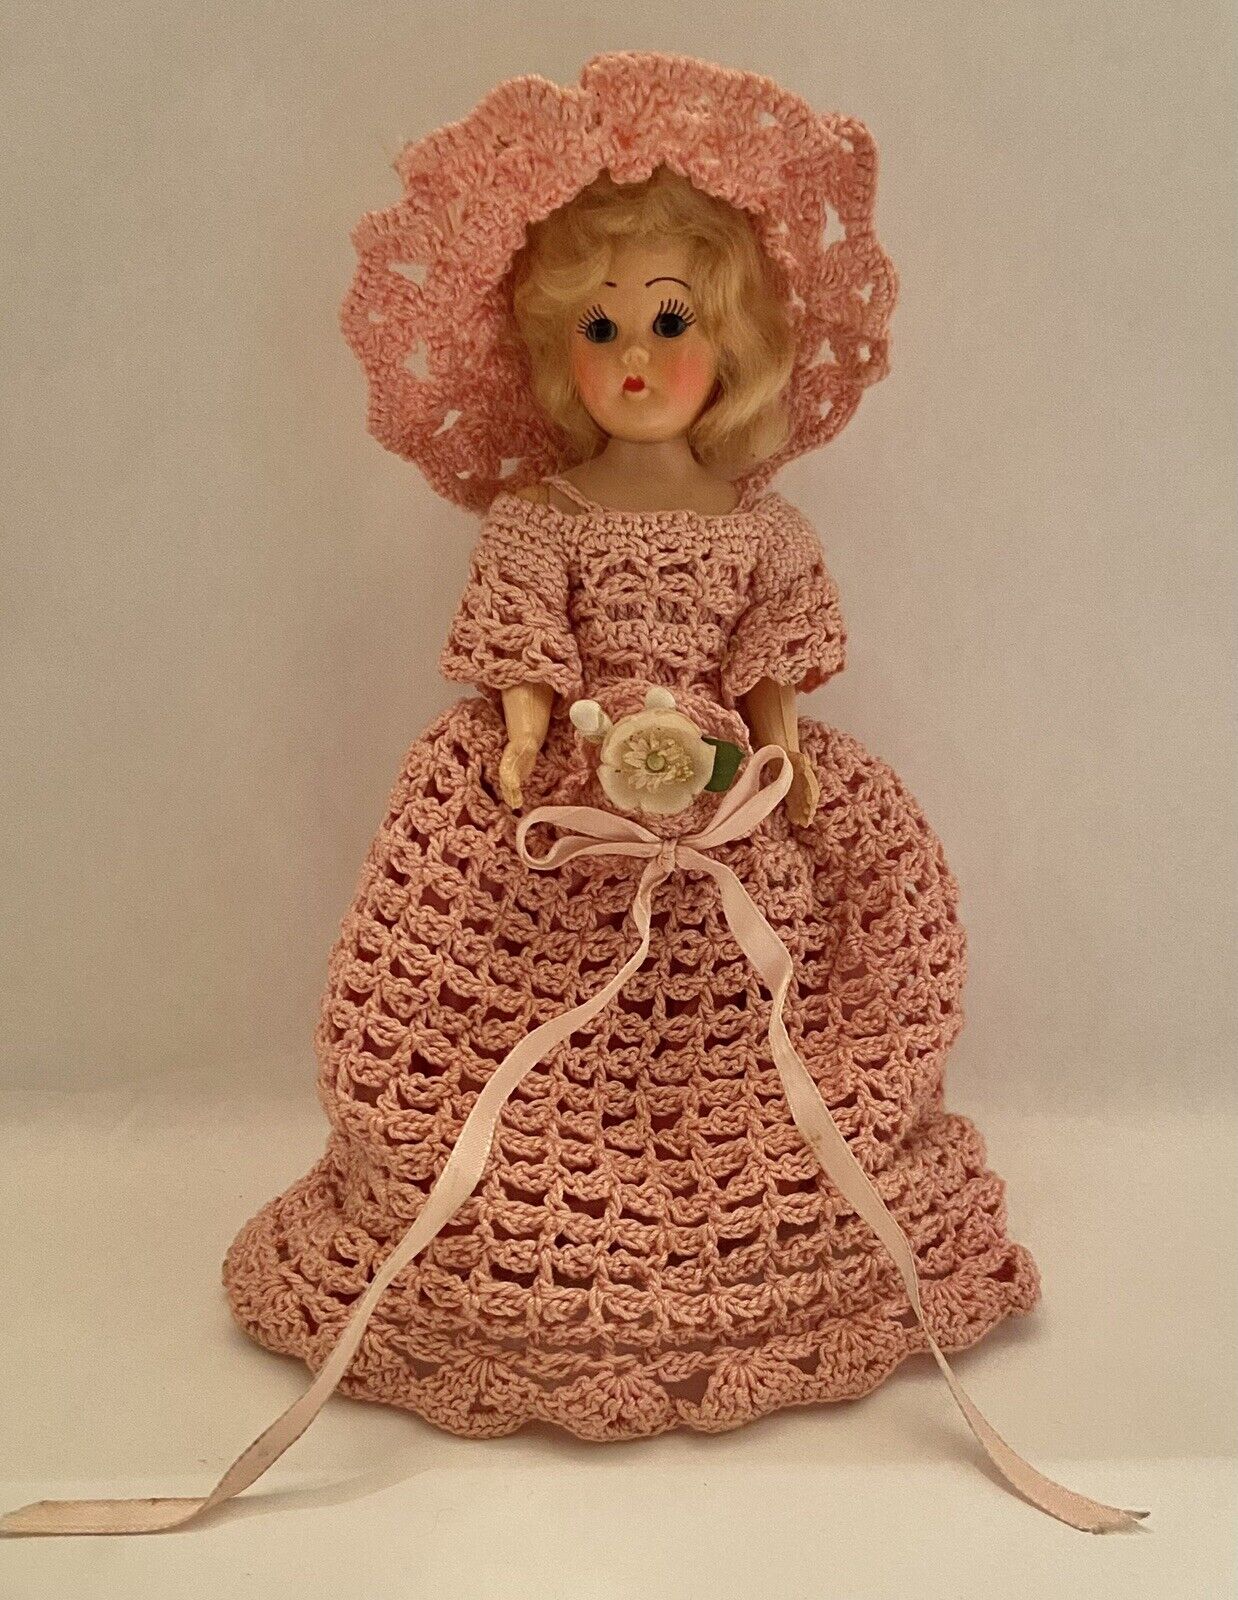 Vintage Blonde Lingerie Lou Doll-Pink Crocheted Hat & Dress-7 Inches-1950s